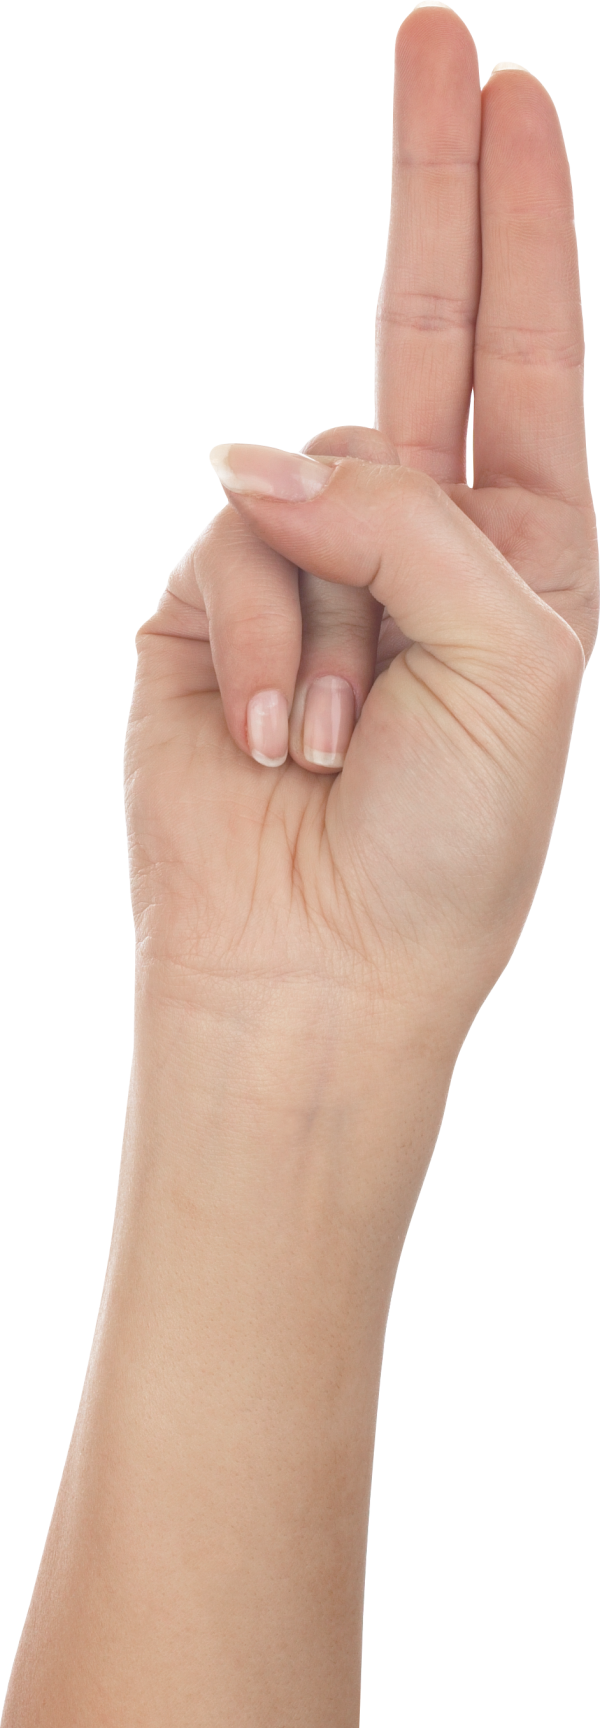 Hands PNG Free Image Download 98